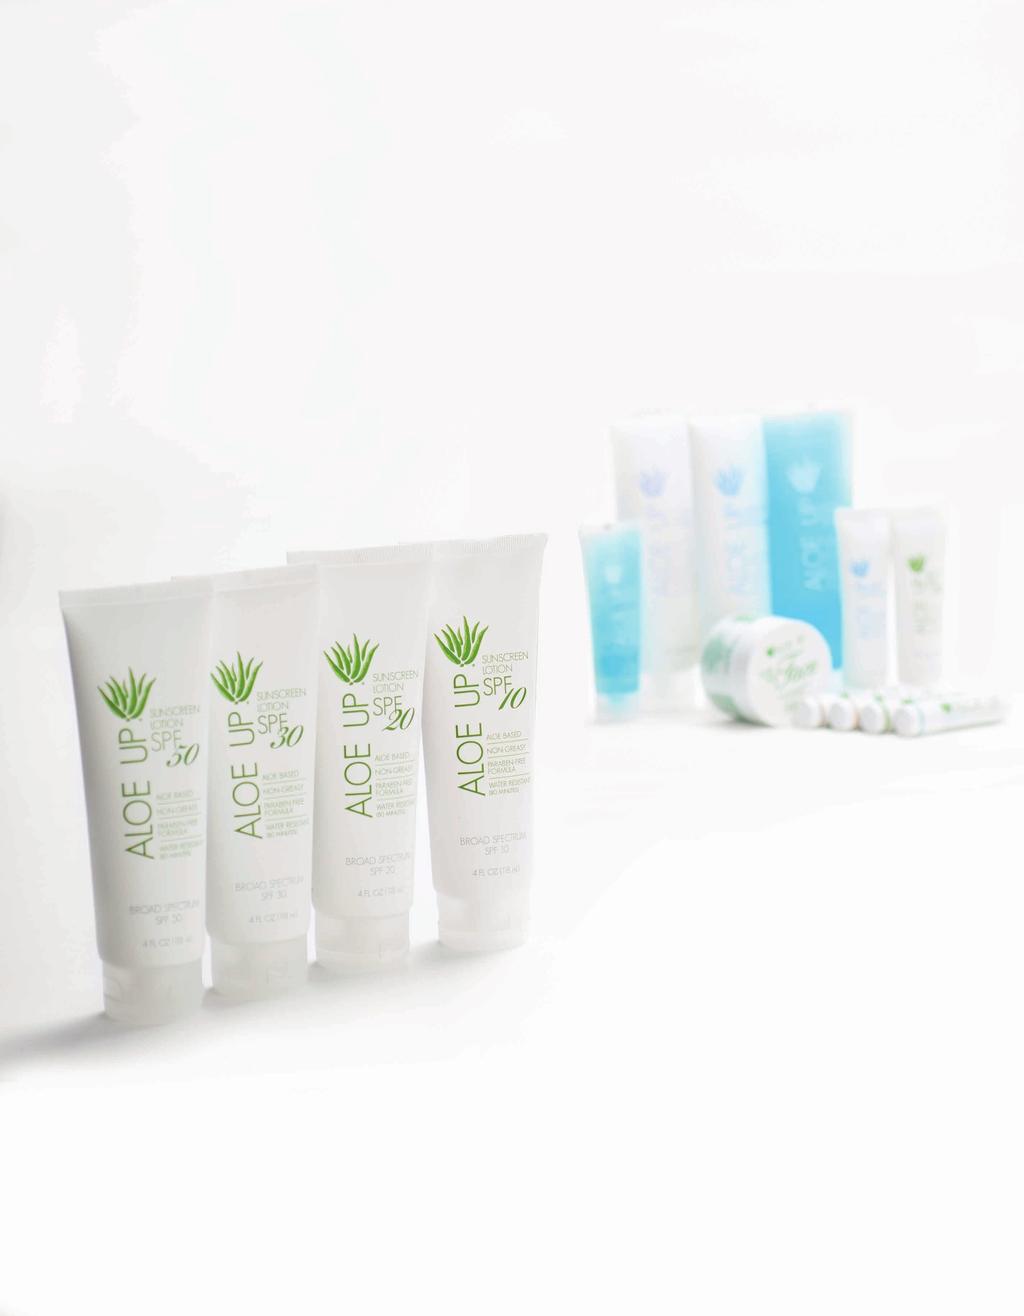 ESSENTIAL WHITE COLLECTION Our latest formula innovation is aloe based and infused with the finest antioxidants, emollients and skin conditioners with a hint of refreshing fragrance.